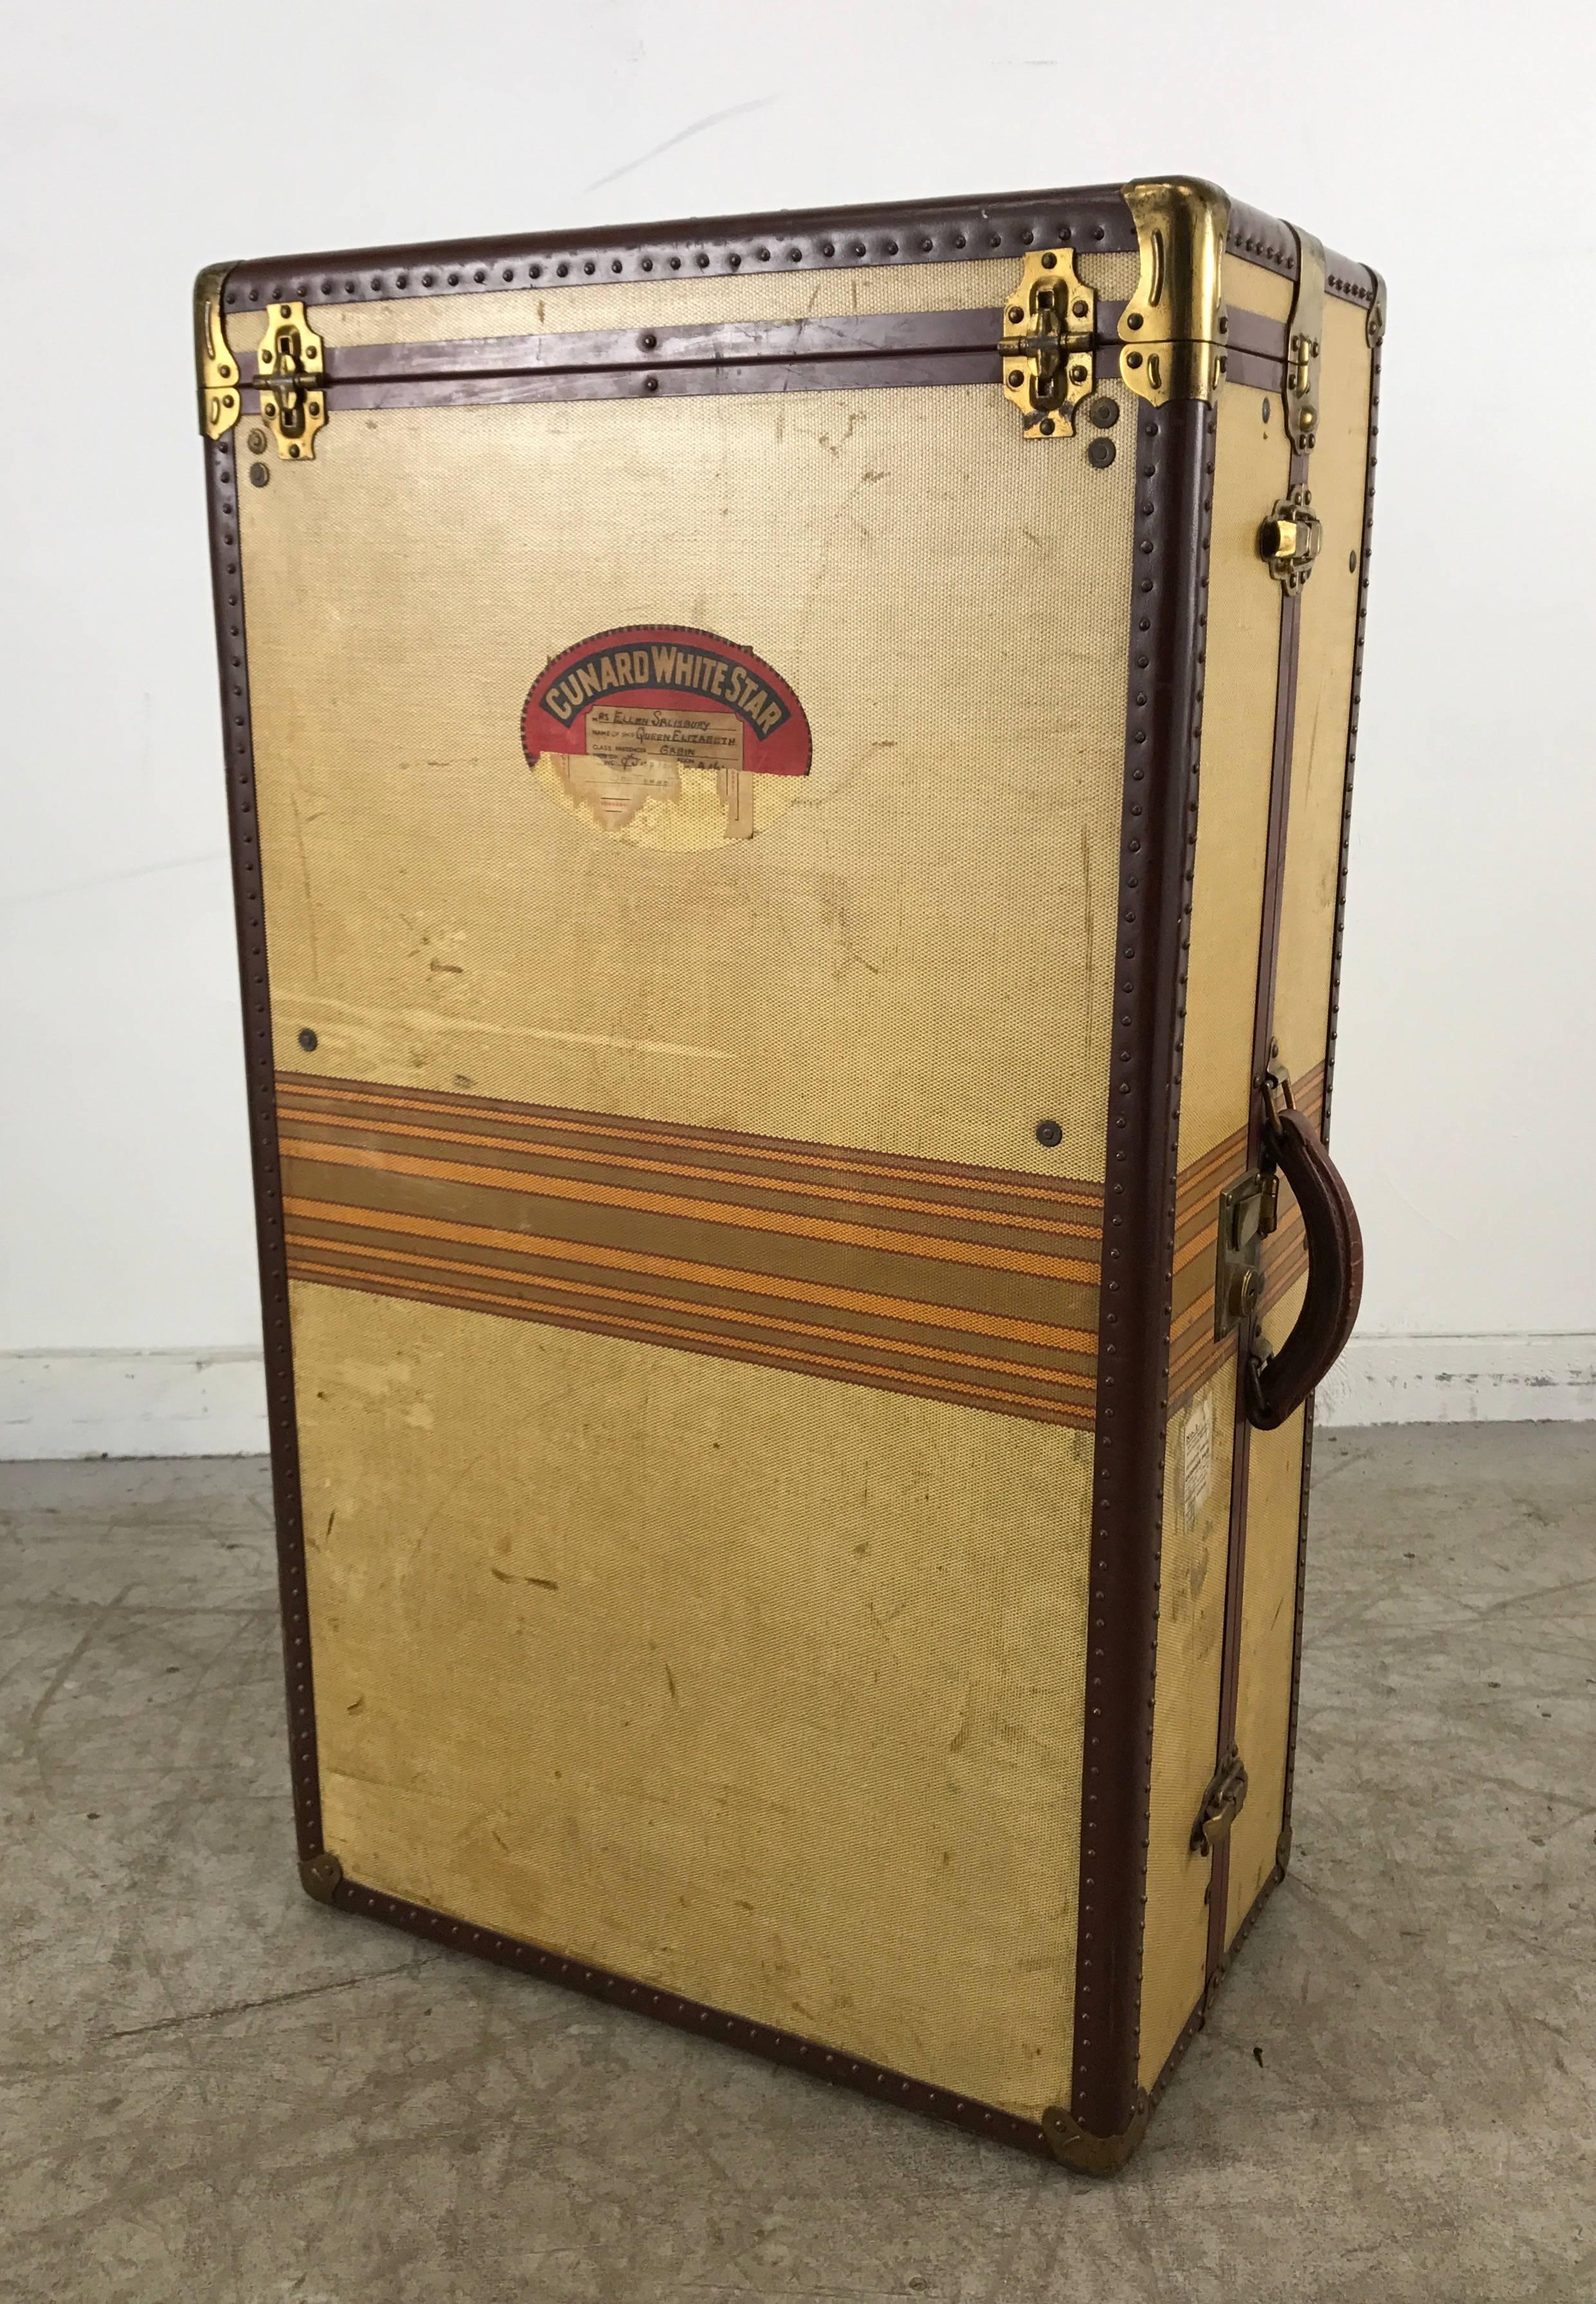 Classic Wardrobe trunk manufactured by Mendel Tourist in excellent original condition.

Striped canvas wardrobe steamer cabin trunk with leather trim and brass accents, in the Louis Vuitton style, with three fitted interior drawers on one side and